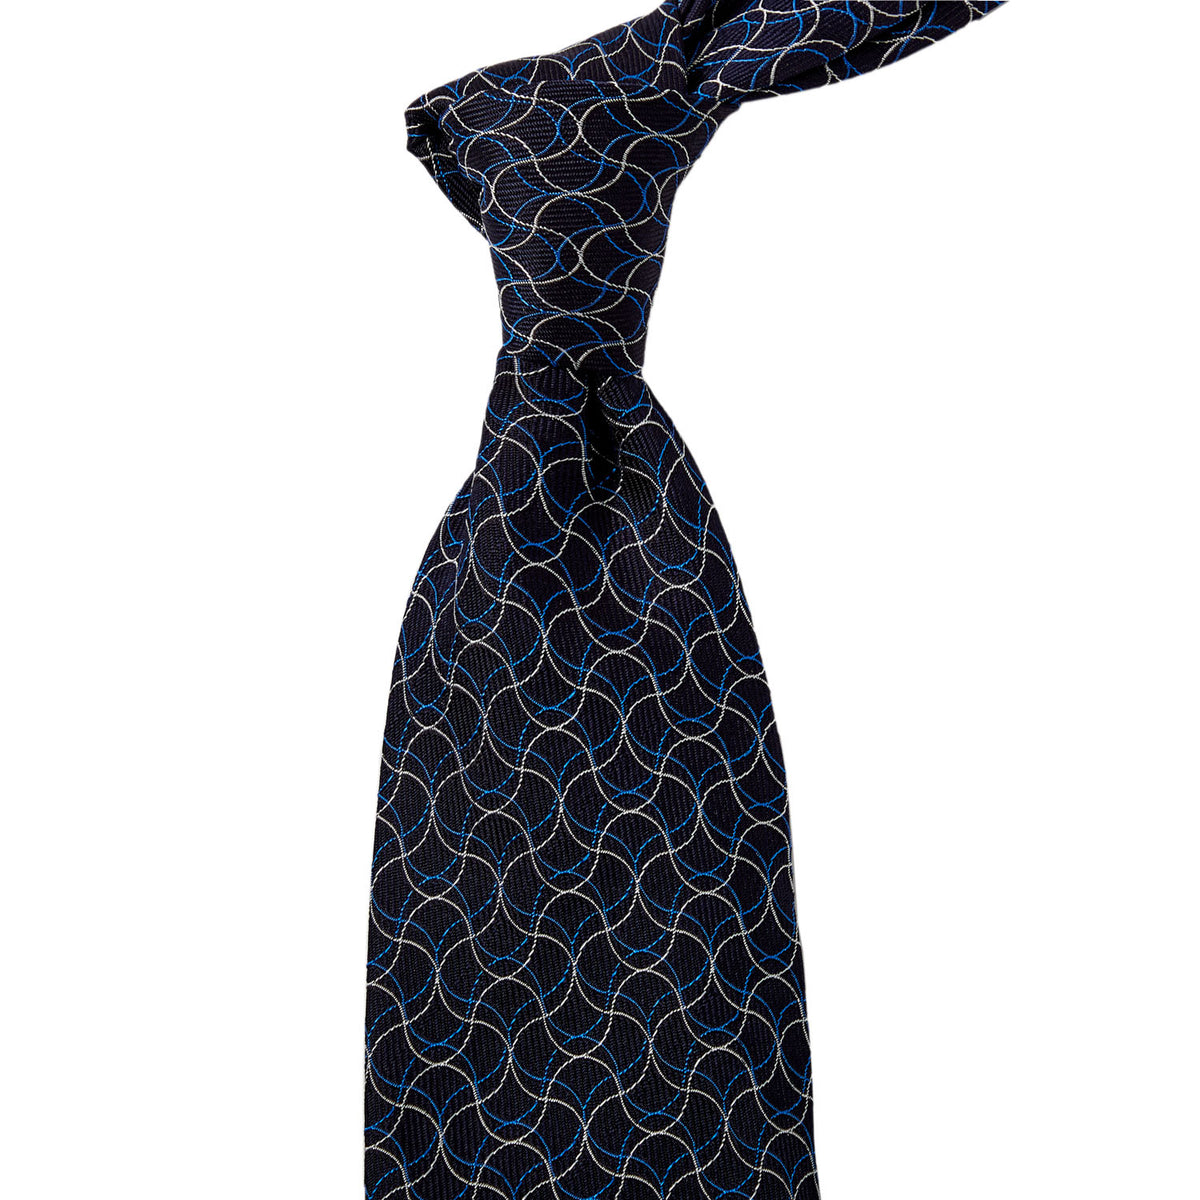 A "Sovereign Grade Navy Swirl Jacquard Tie" from KirbyAllison.com with a black and blue pattern.